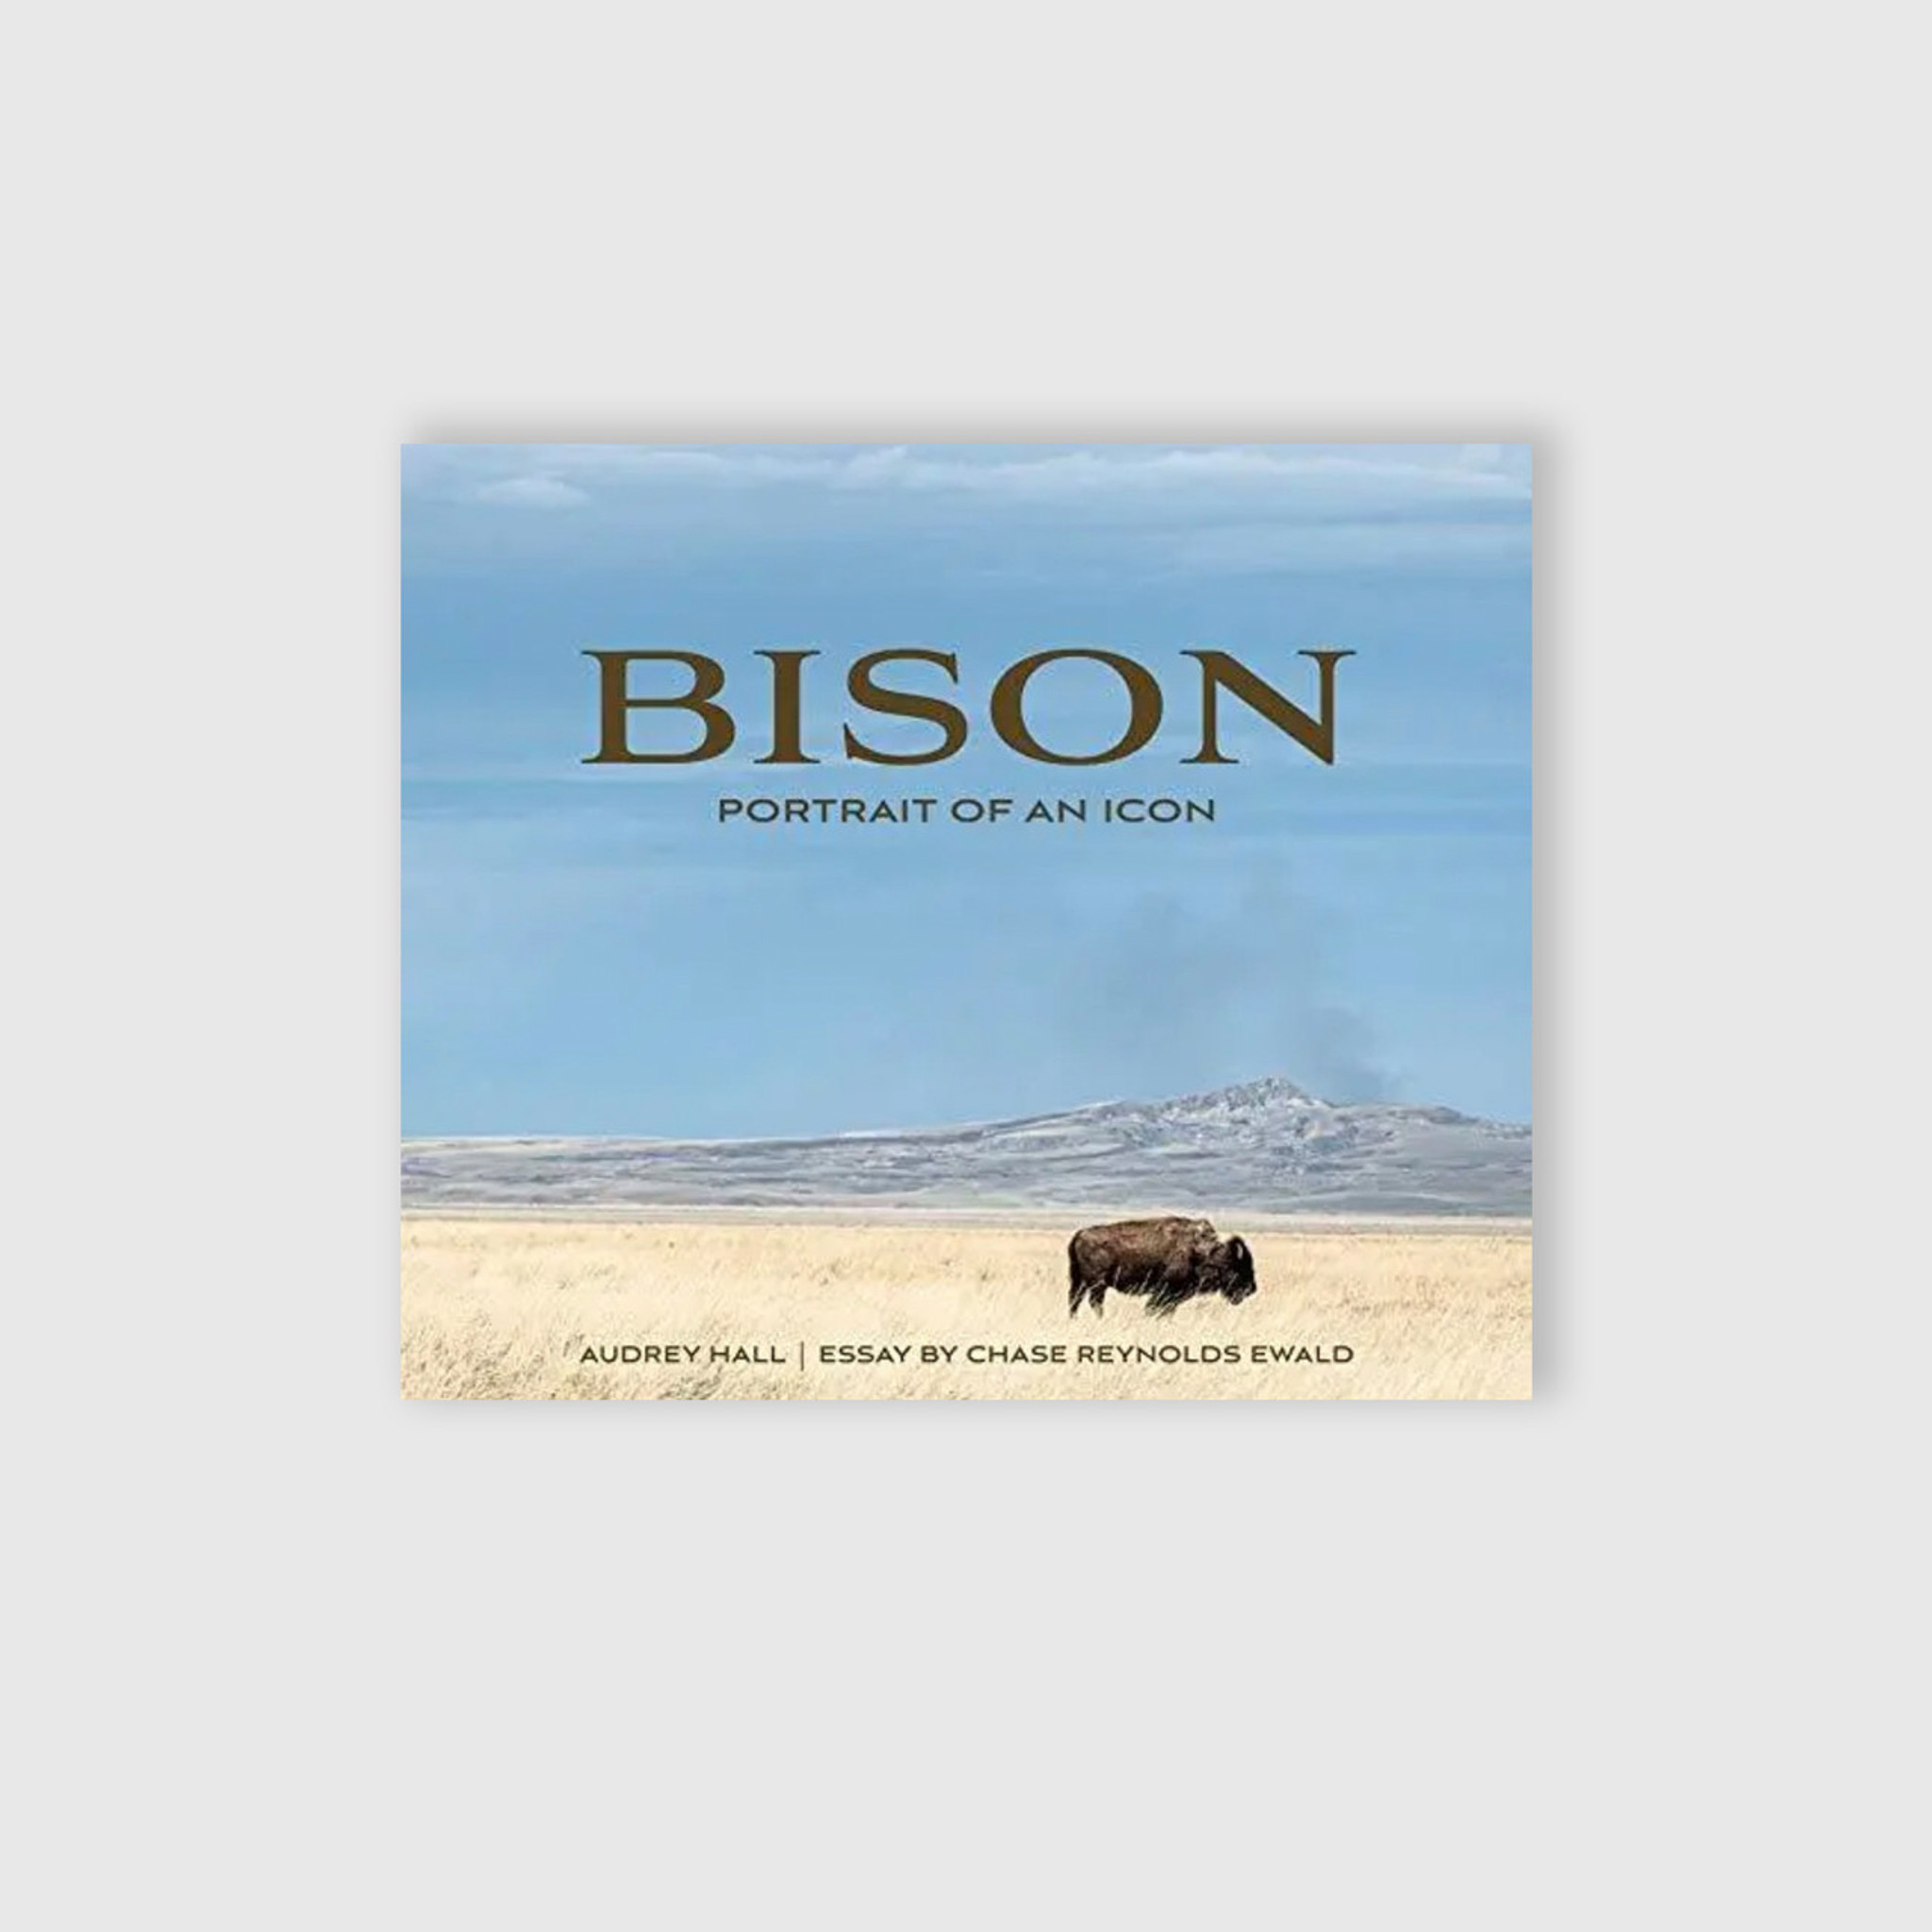 Bison: Portrait of an Icon by Chase Reynolds Ewald and Audrey Hall (Hardcover) | available in the elk & HAMMER Gallery of Bozeman, Montana, curated by Ashley Childs